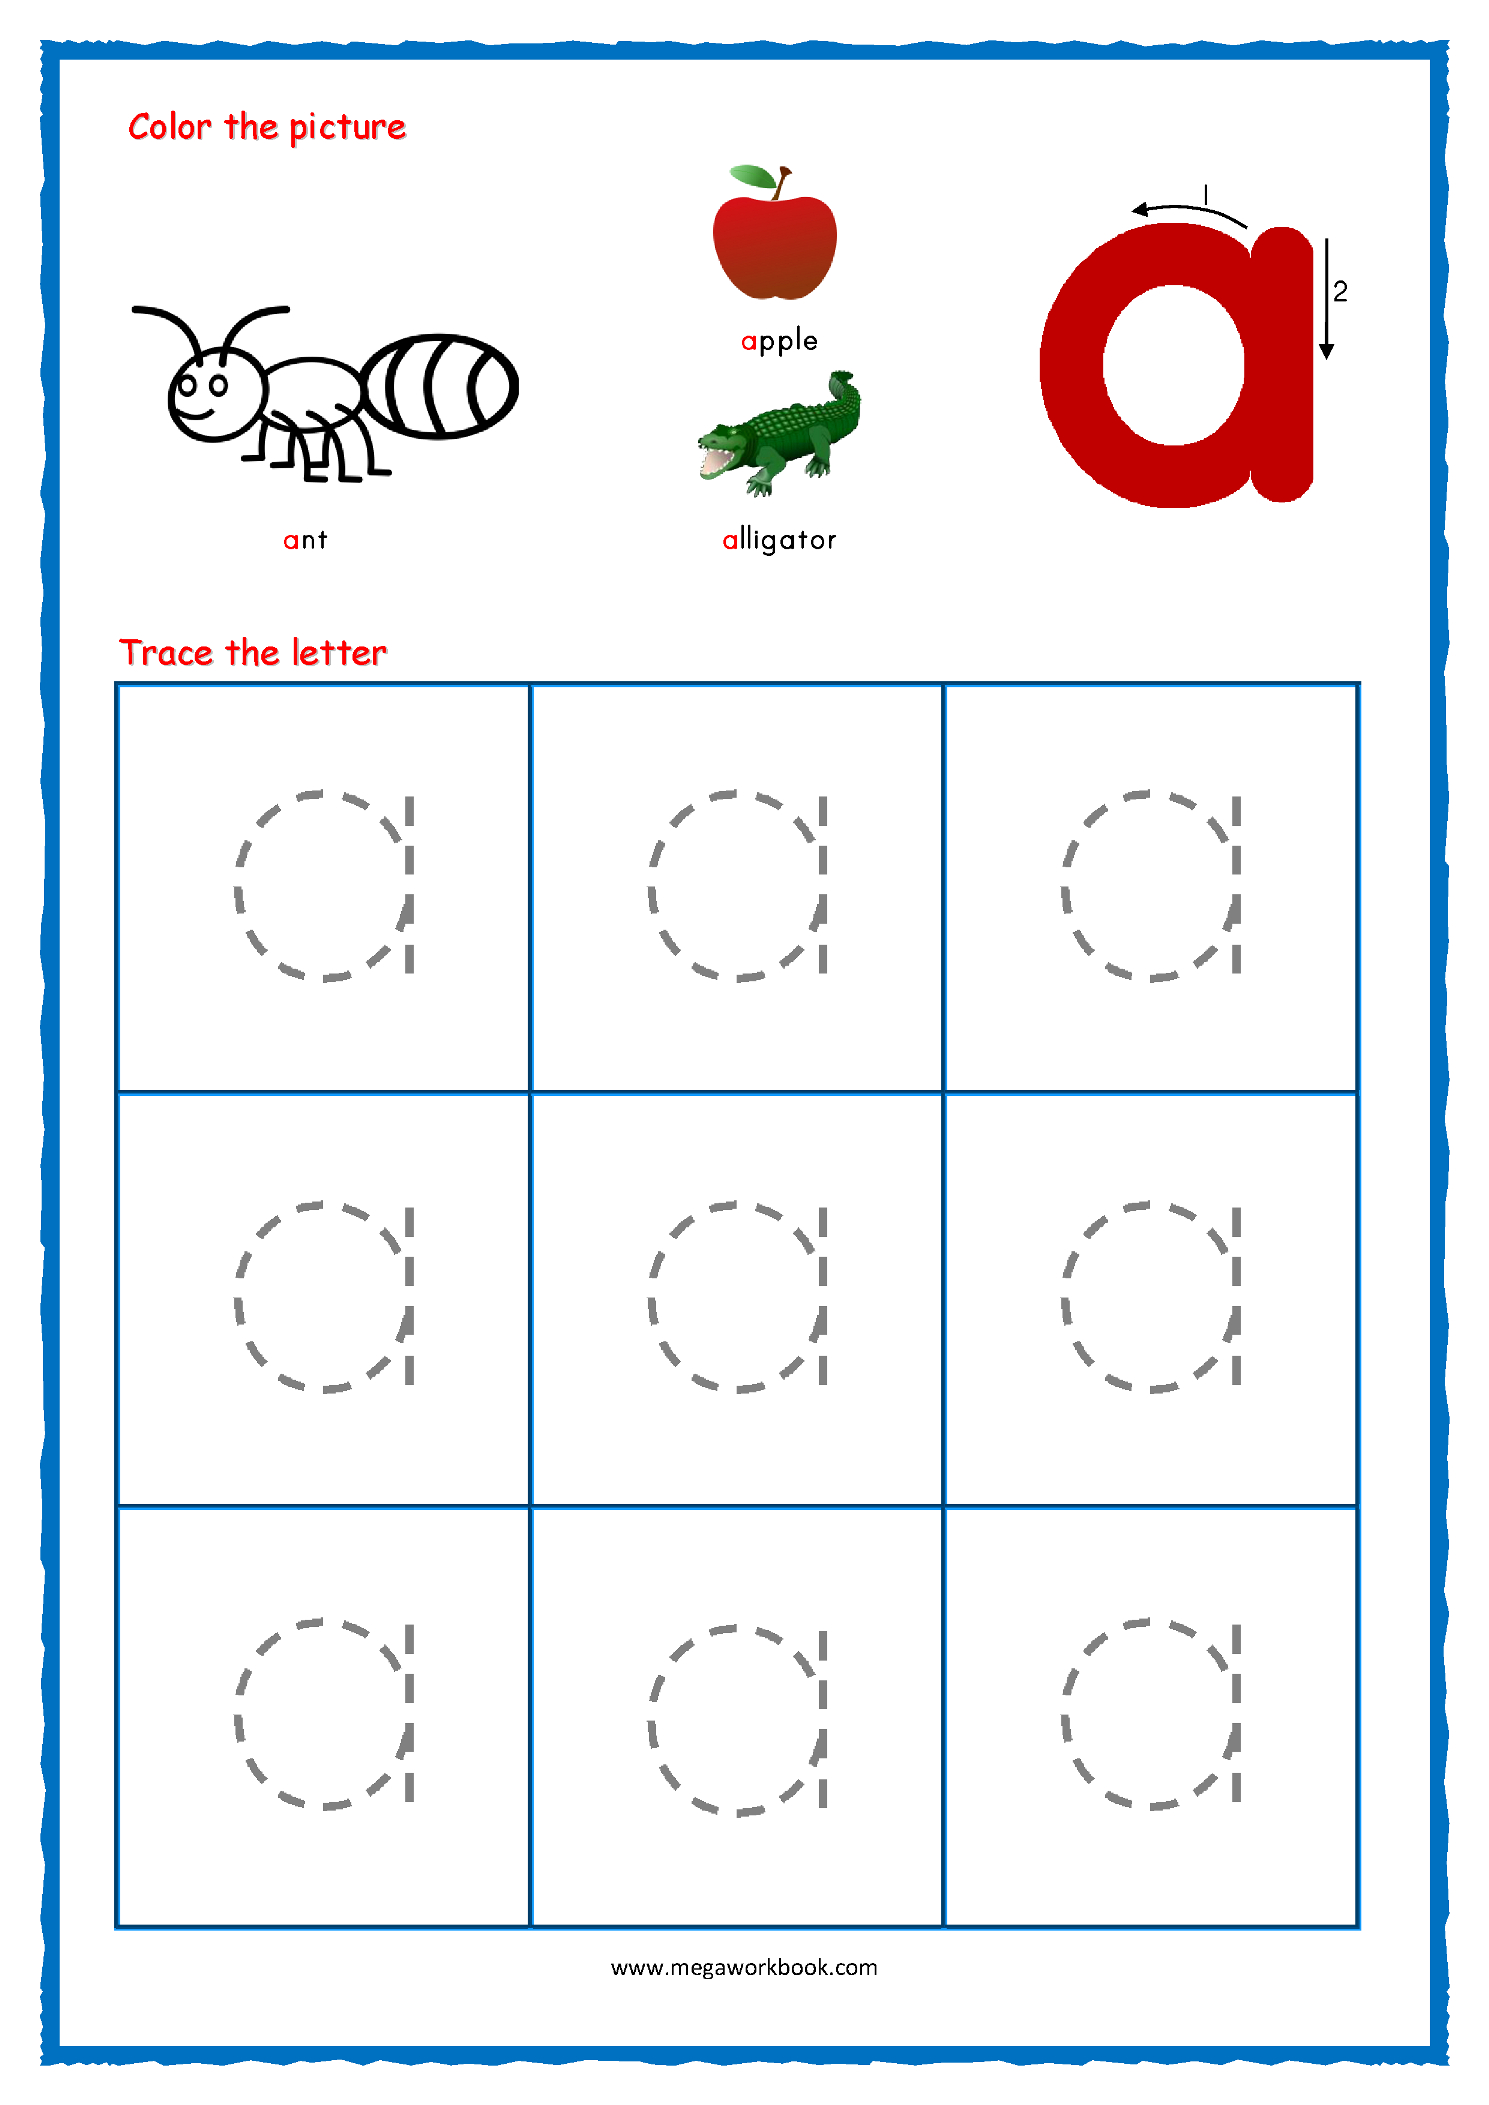 Alphabet Tracing - Small Letters - Alphabet Tracing pertaining to Tracing Small Letters Of The Alphabet